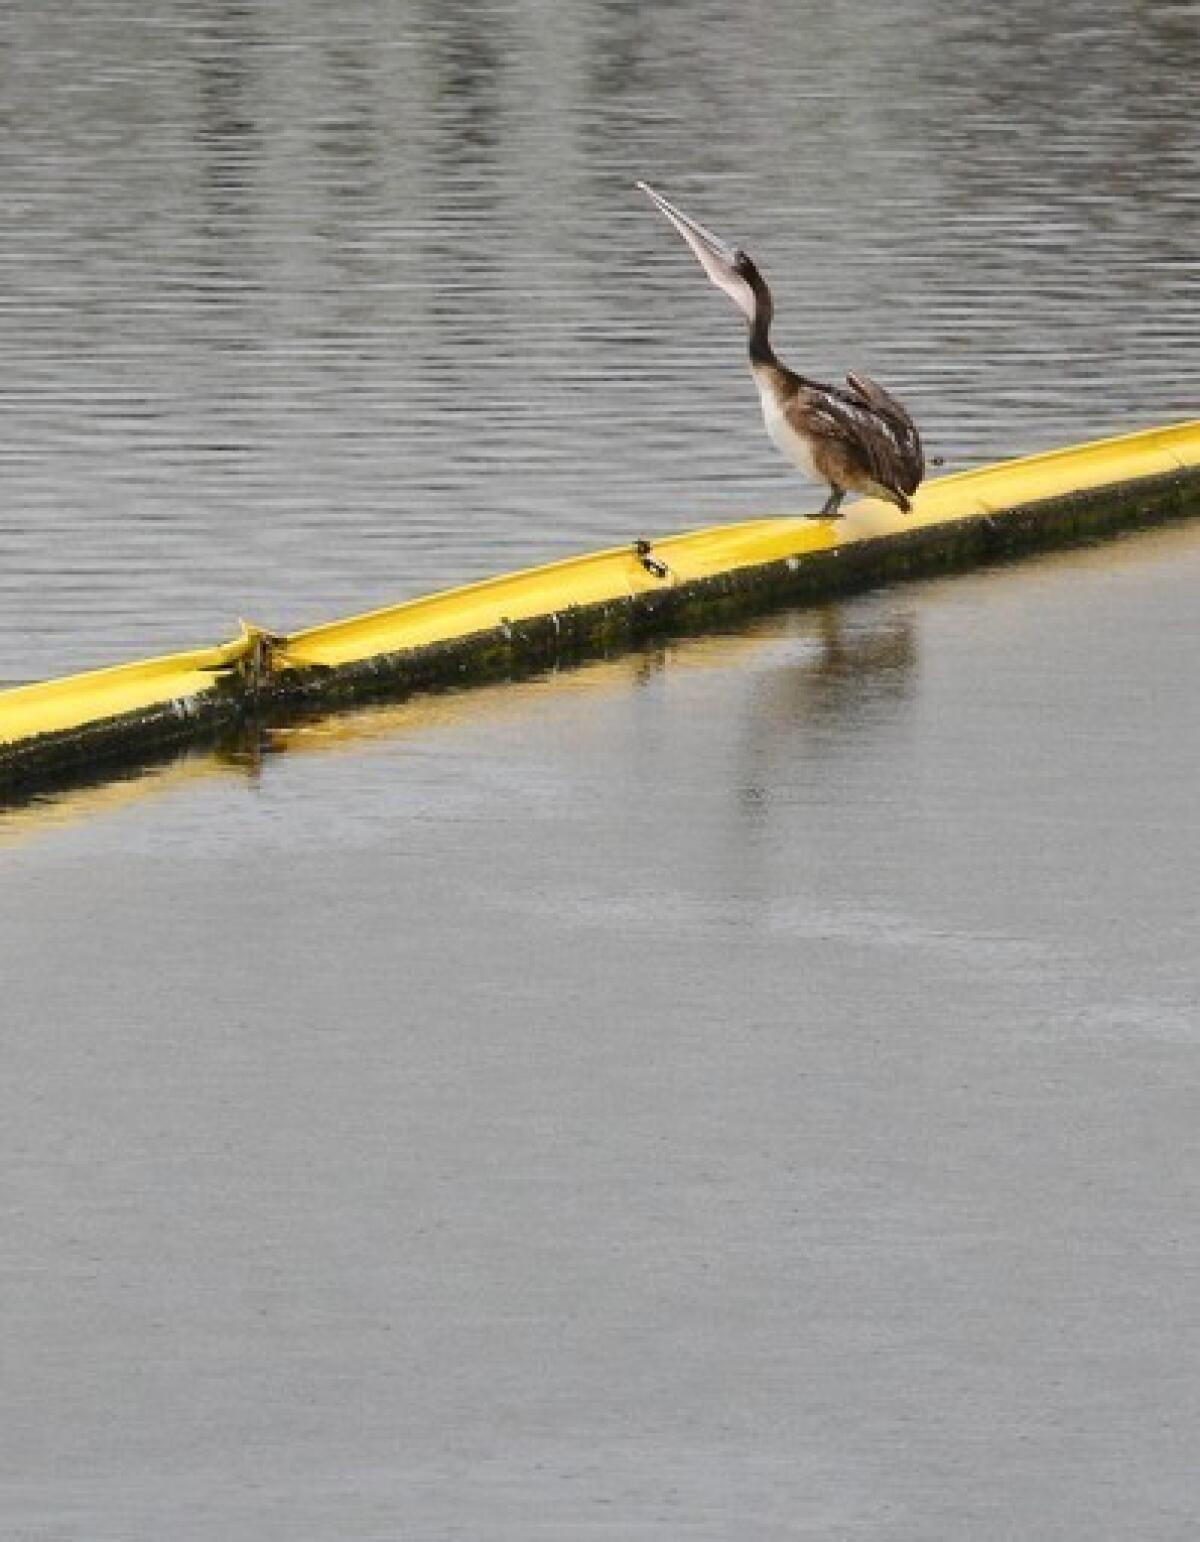 A pelican swallows its meal as it perches on a trash boom in the Ballona Creek near Marina del Rey. Los Angeles pays about $36 million a year for street sweeping, storm drain maintenance and coastal cleanup efforts.